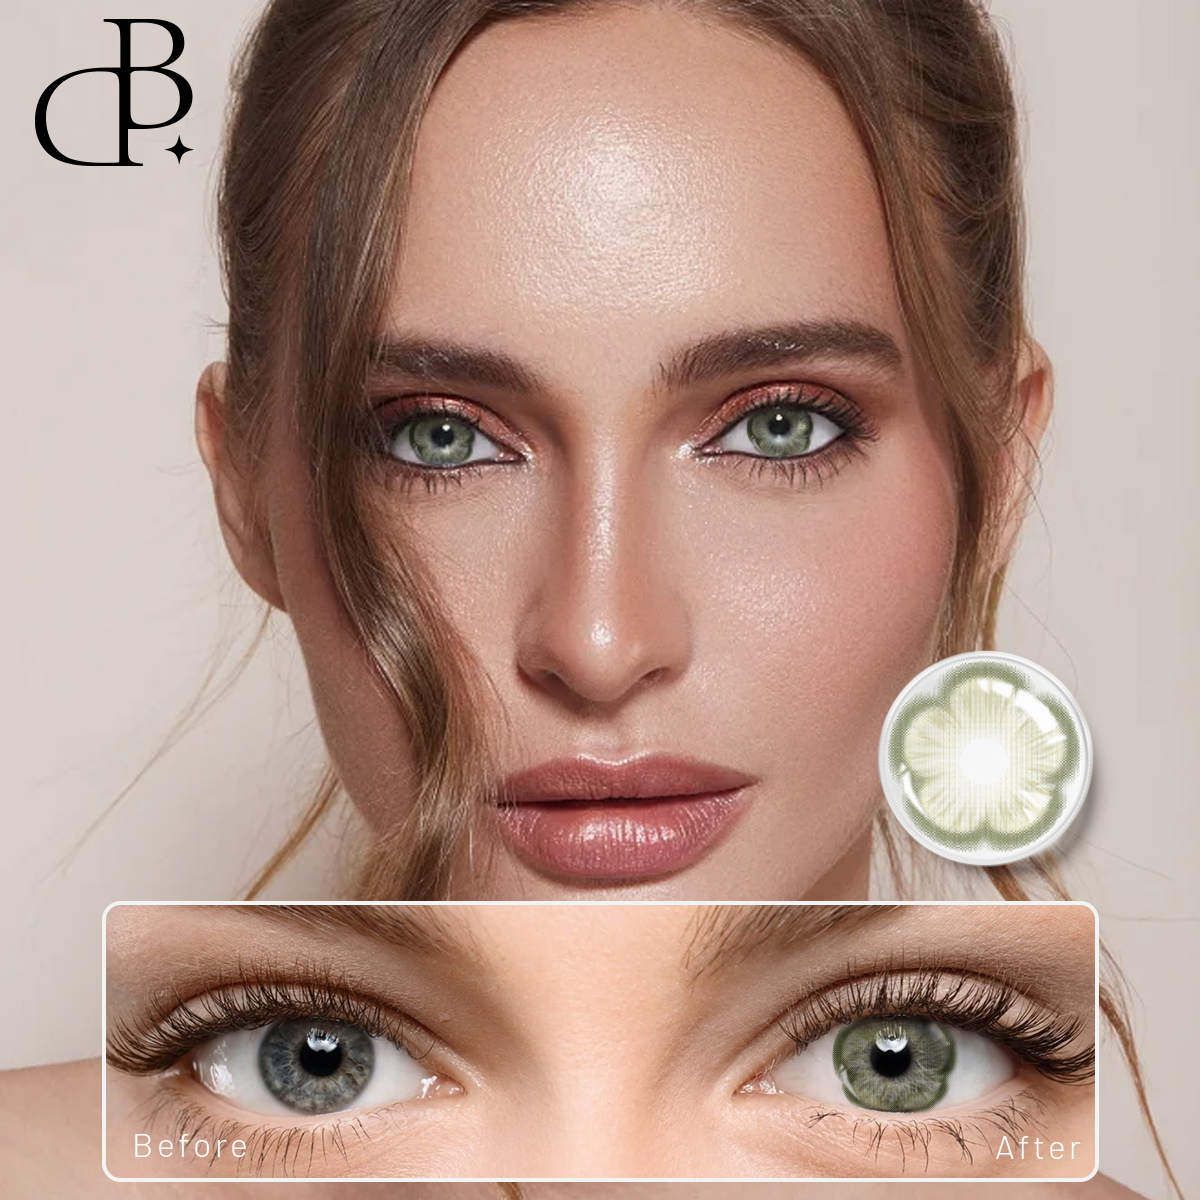 DBeyes OEM special shaped green petals contact lenses with packaging box prescription contact lens 24 hours delivery